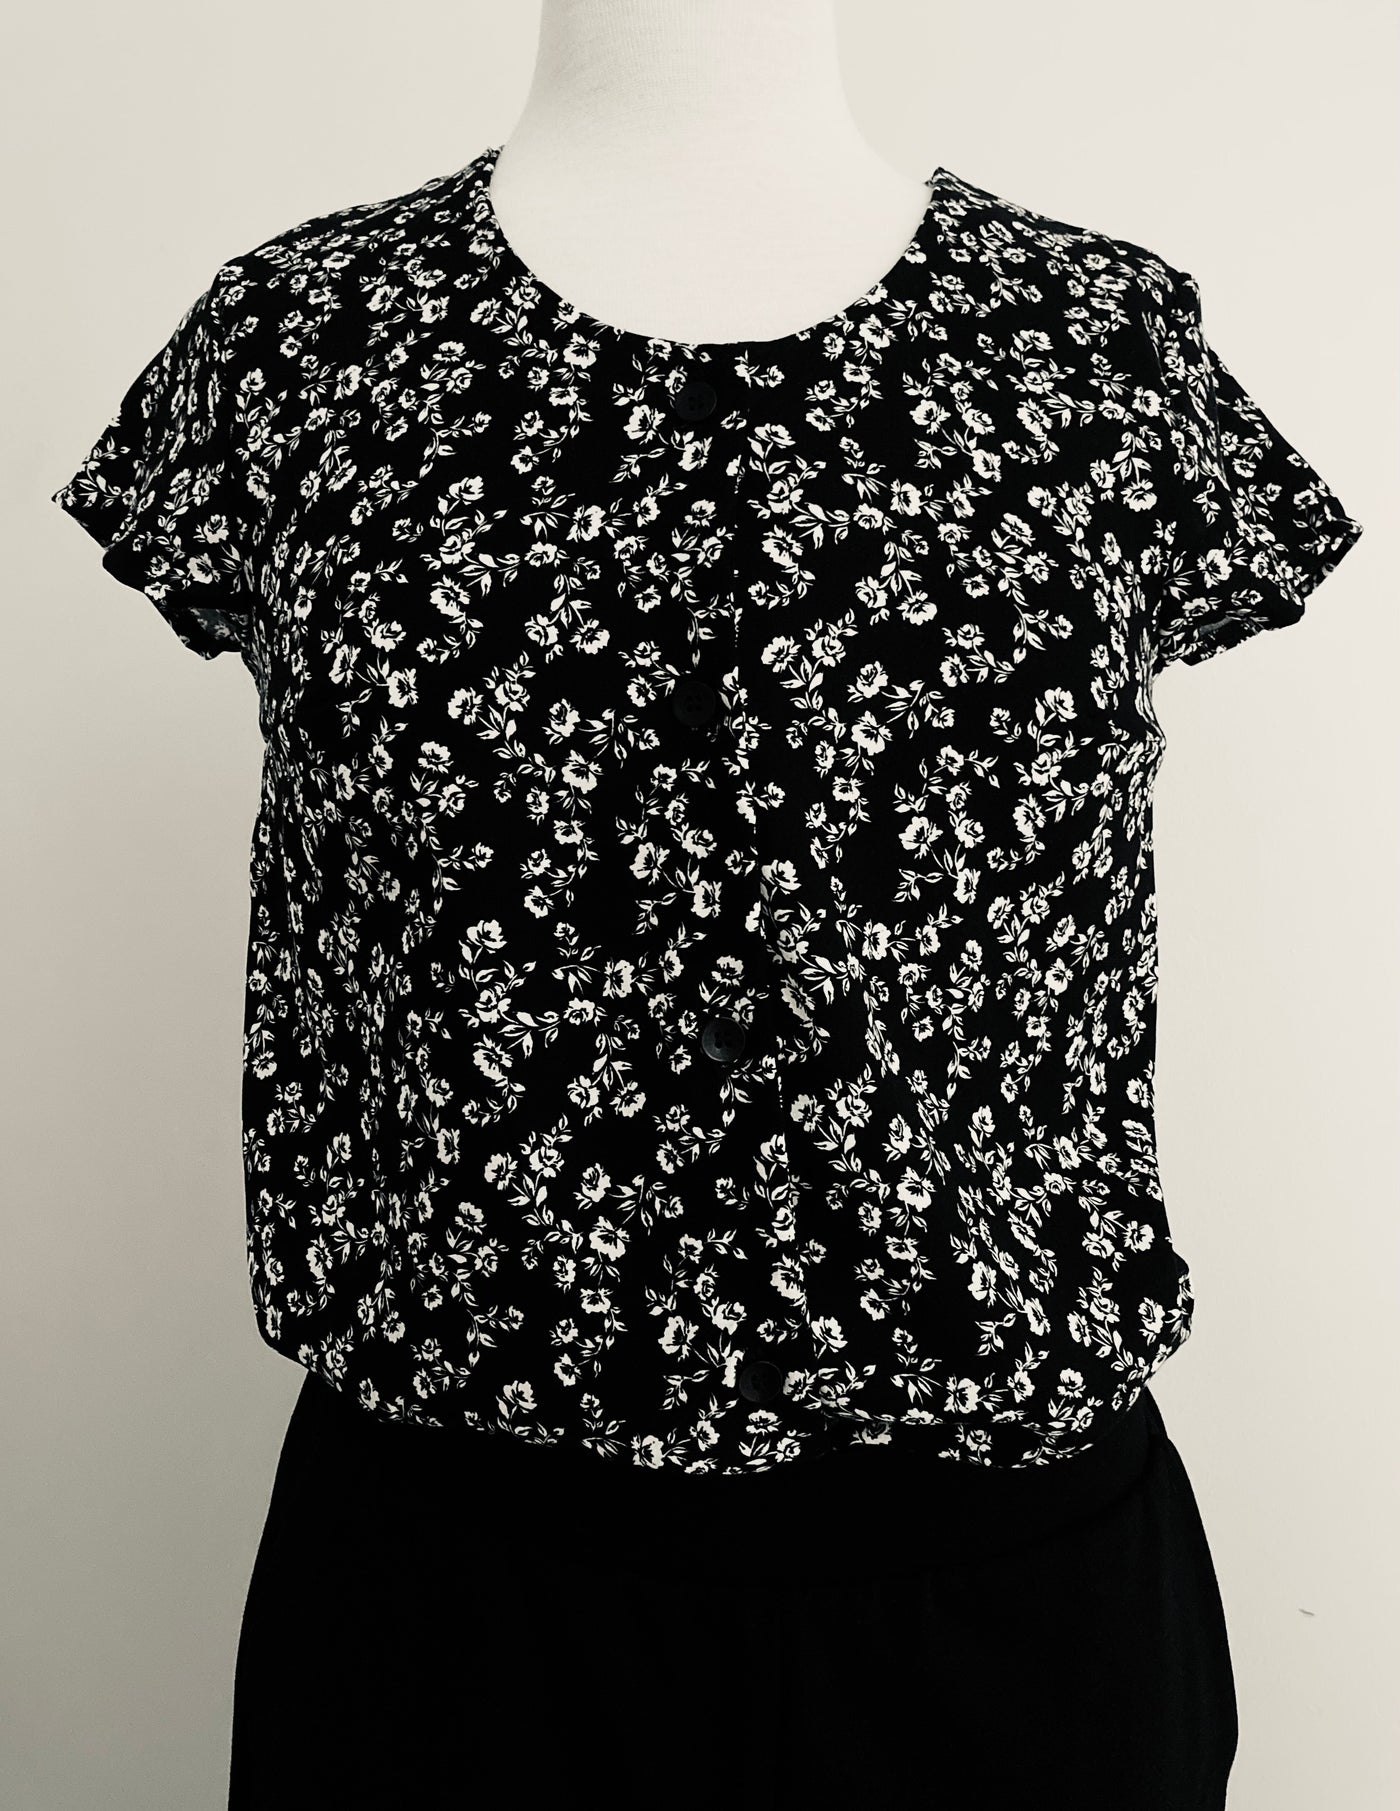 Shorty Blouse / Floral Black and White